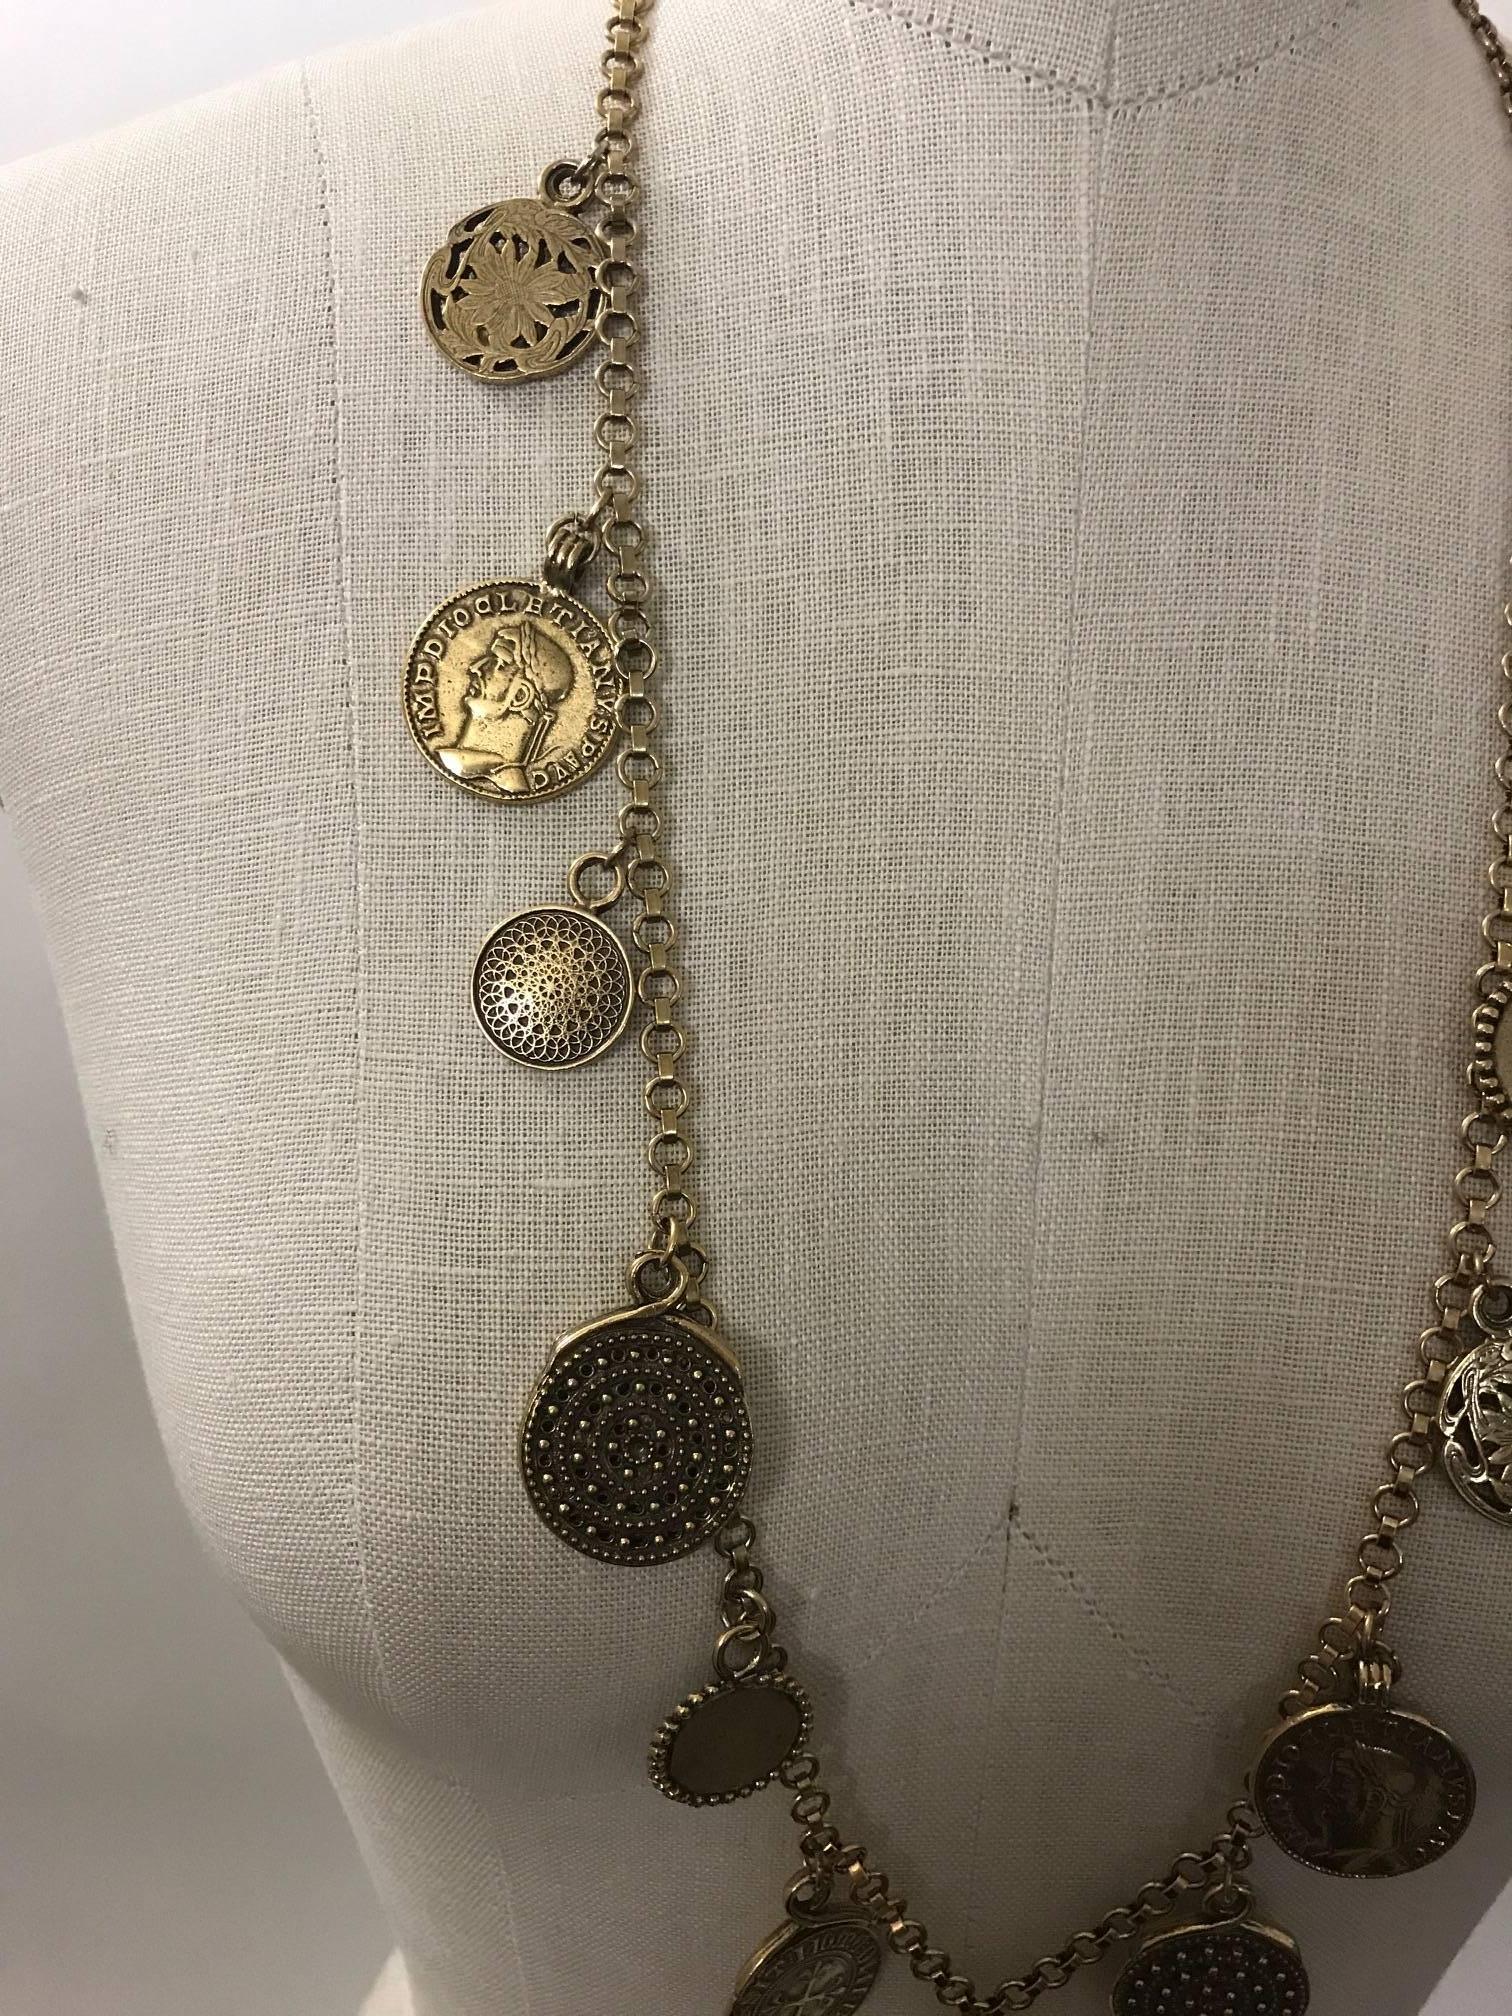 Women's Yves Saint Laurent 1977 Gypsy Coin Medallian Gold Tone Necklace Single Strand